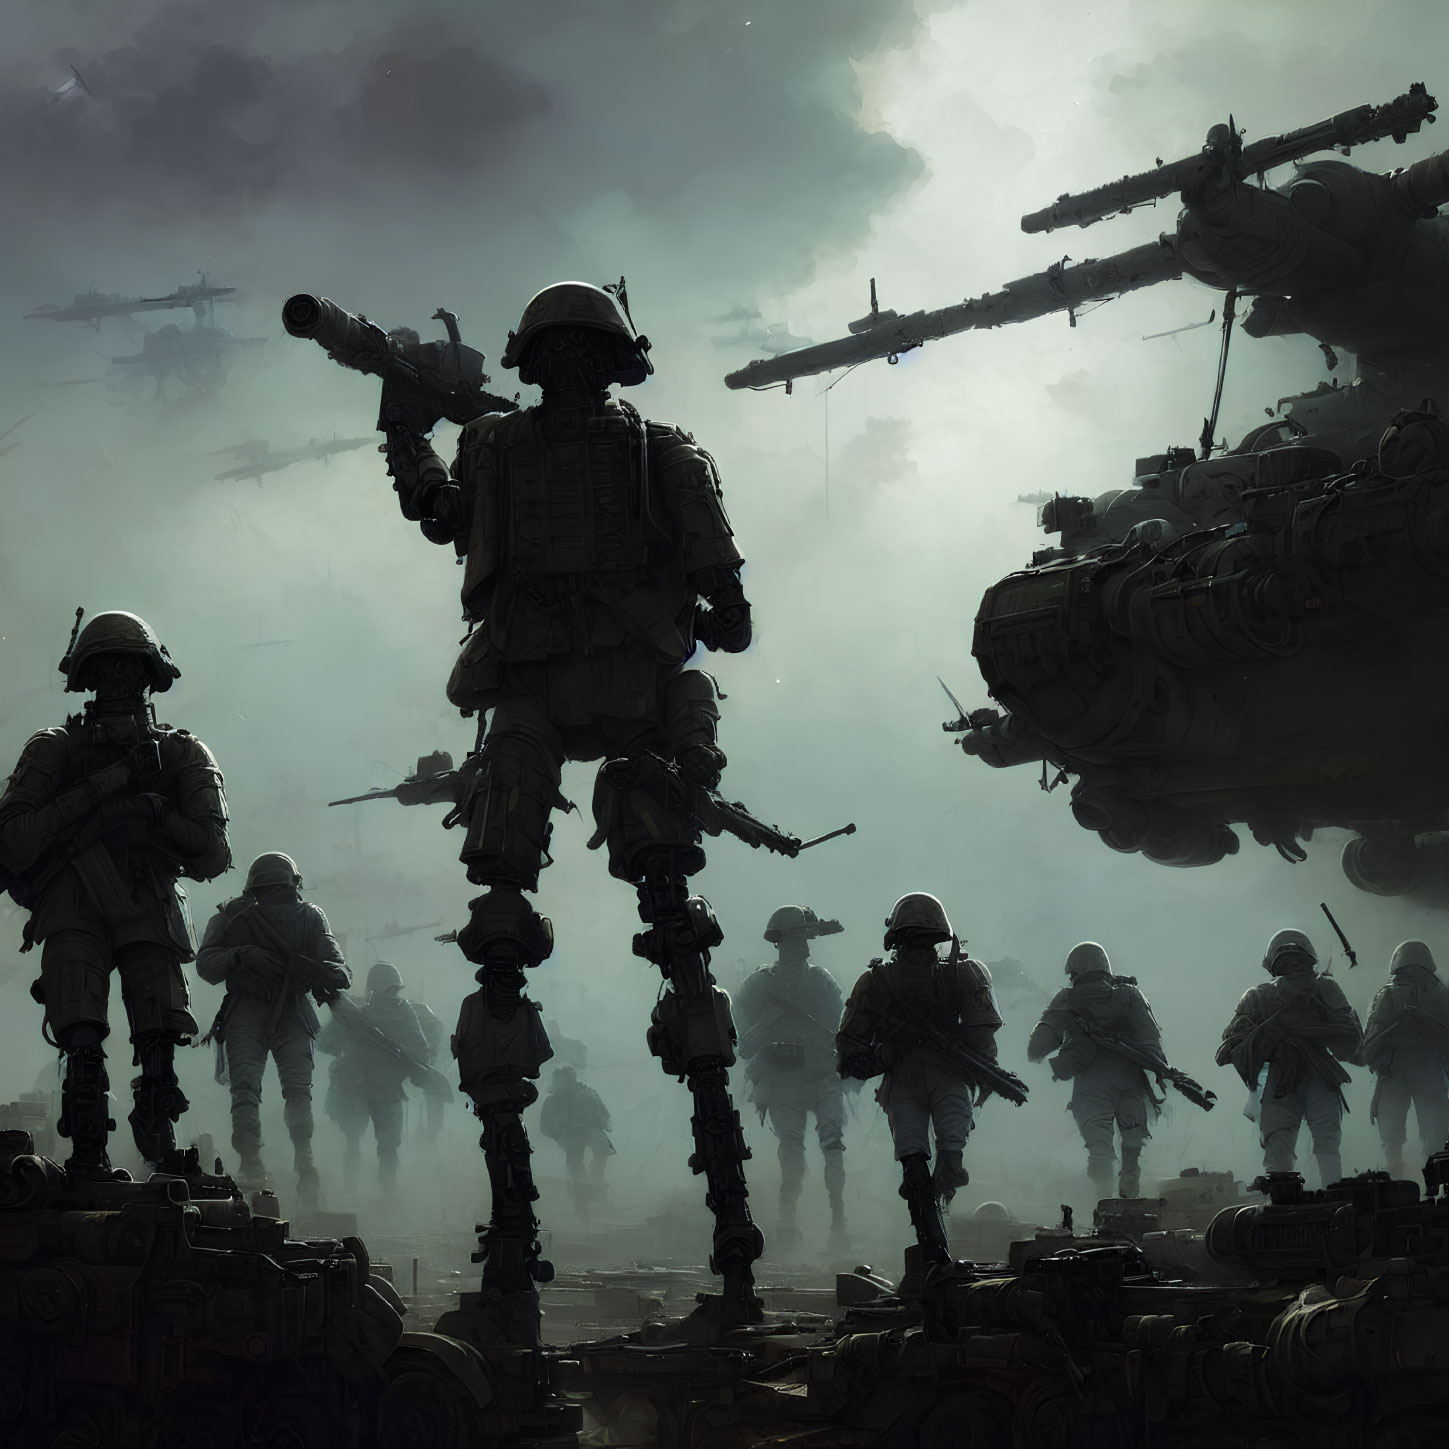 Foggy Battlefield with Soldiers, Mechs, and Tanks in Dystopian War Scene